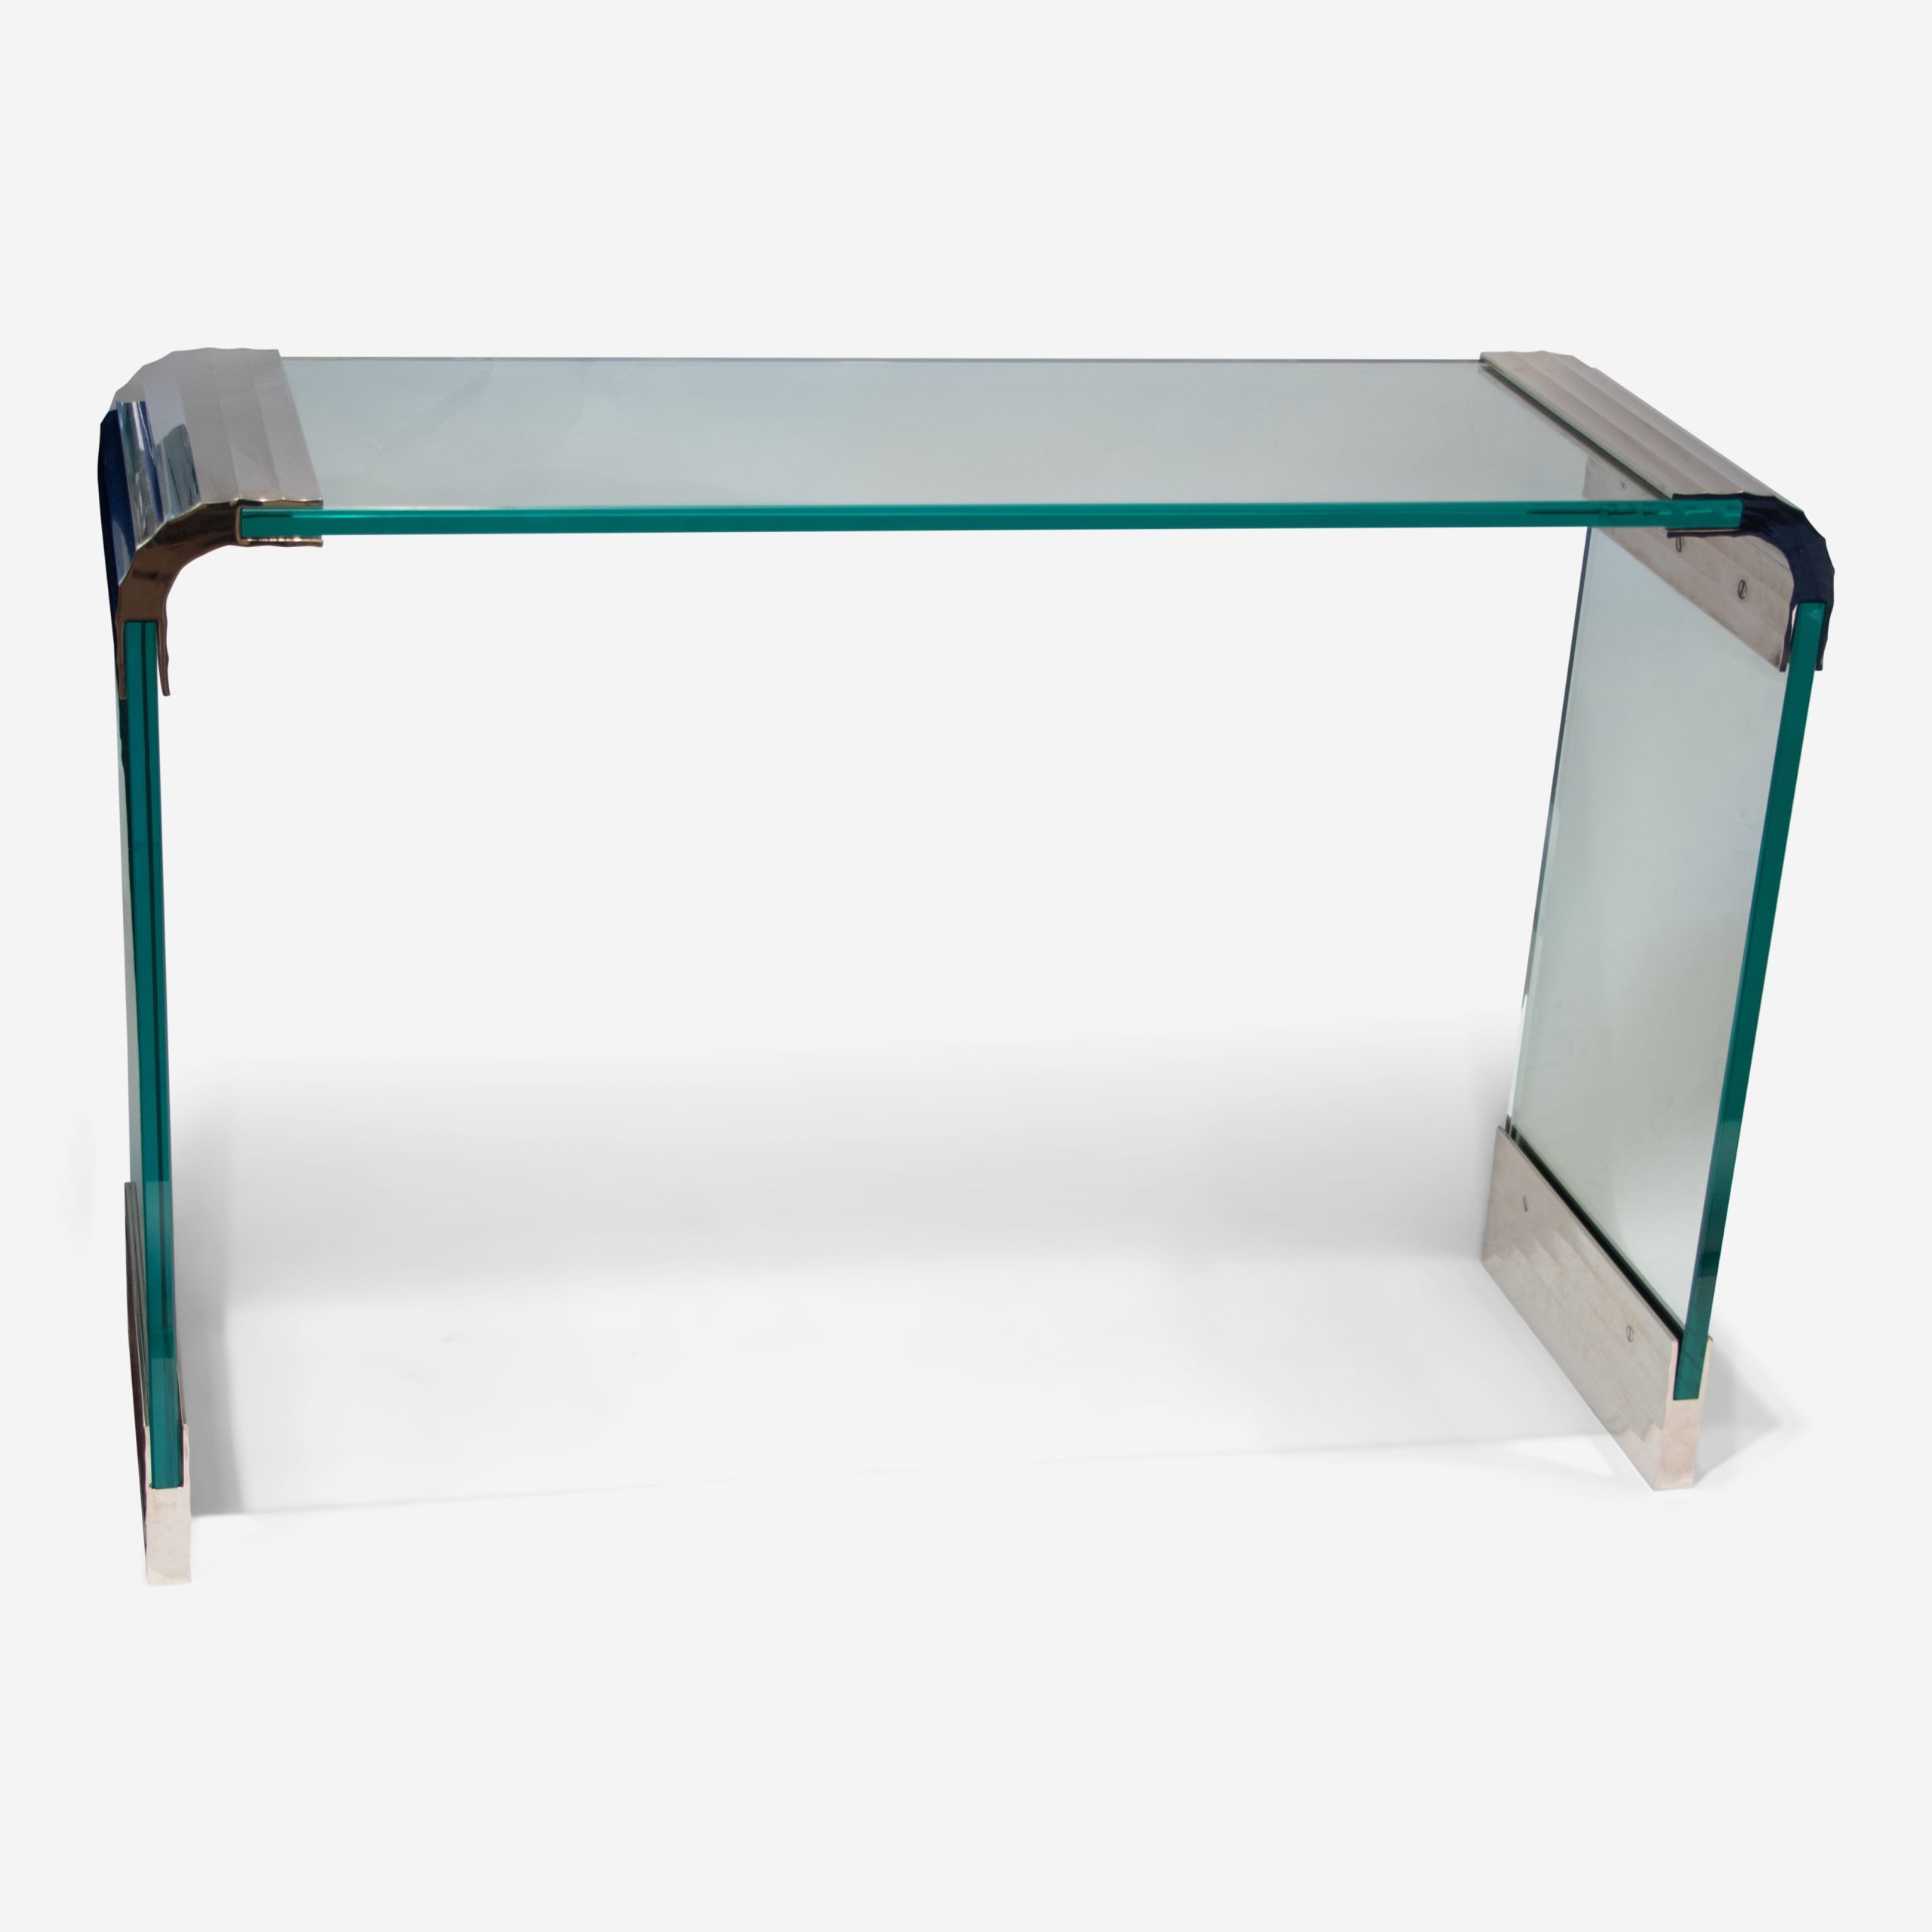 Widely Used Chrome And Glass Console Table – The Silver Fund For Glass And Chrome Console Tables (View 7 of 10)